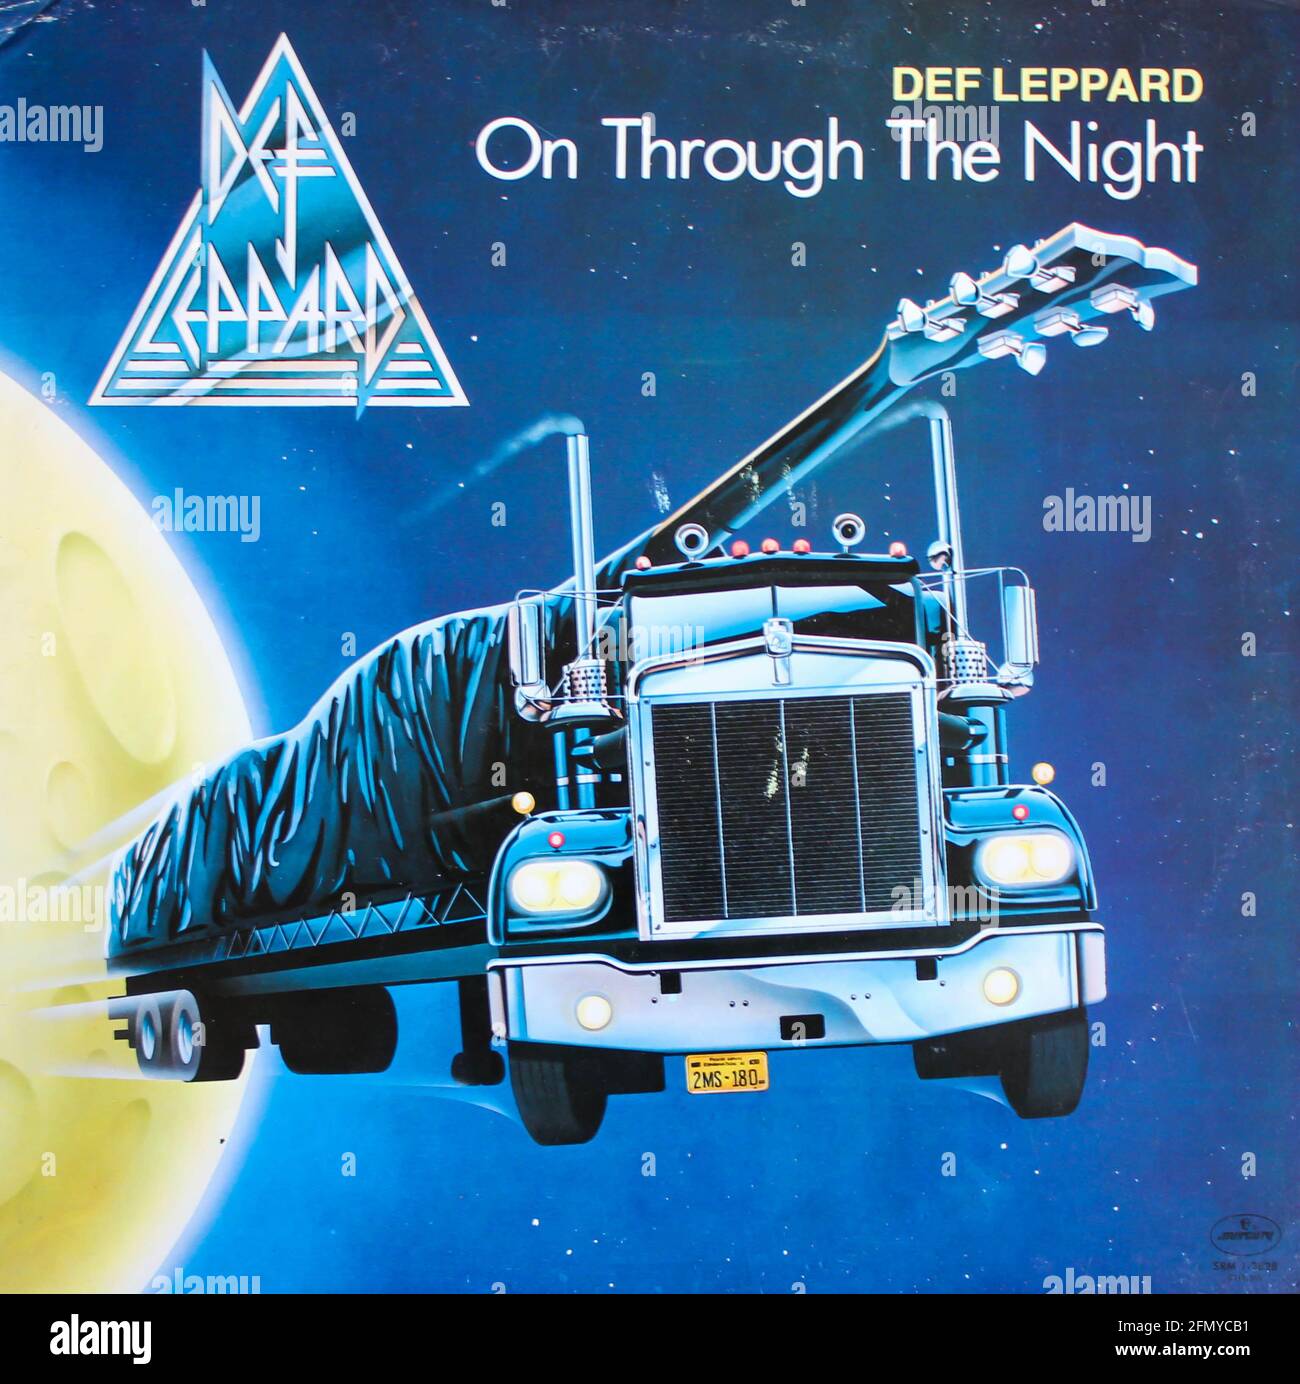 Heavy metal band, Def Leppard music album on vinyl record LP disc. Titled:  On Through the Night album cover Stock Photo - Alamy